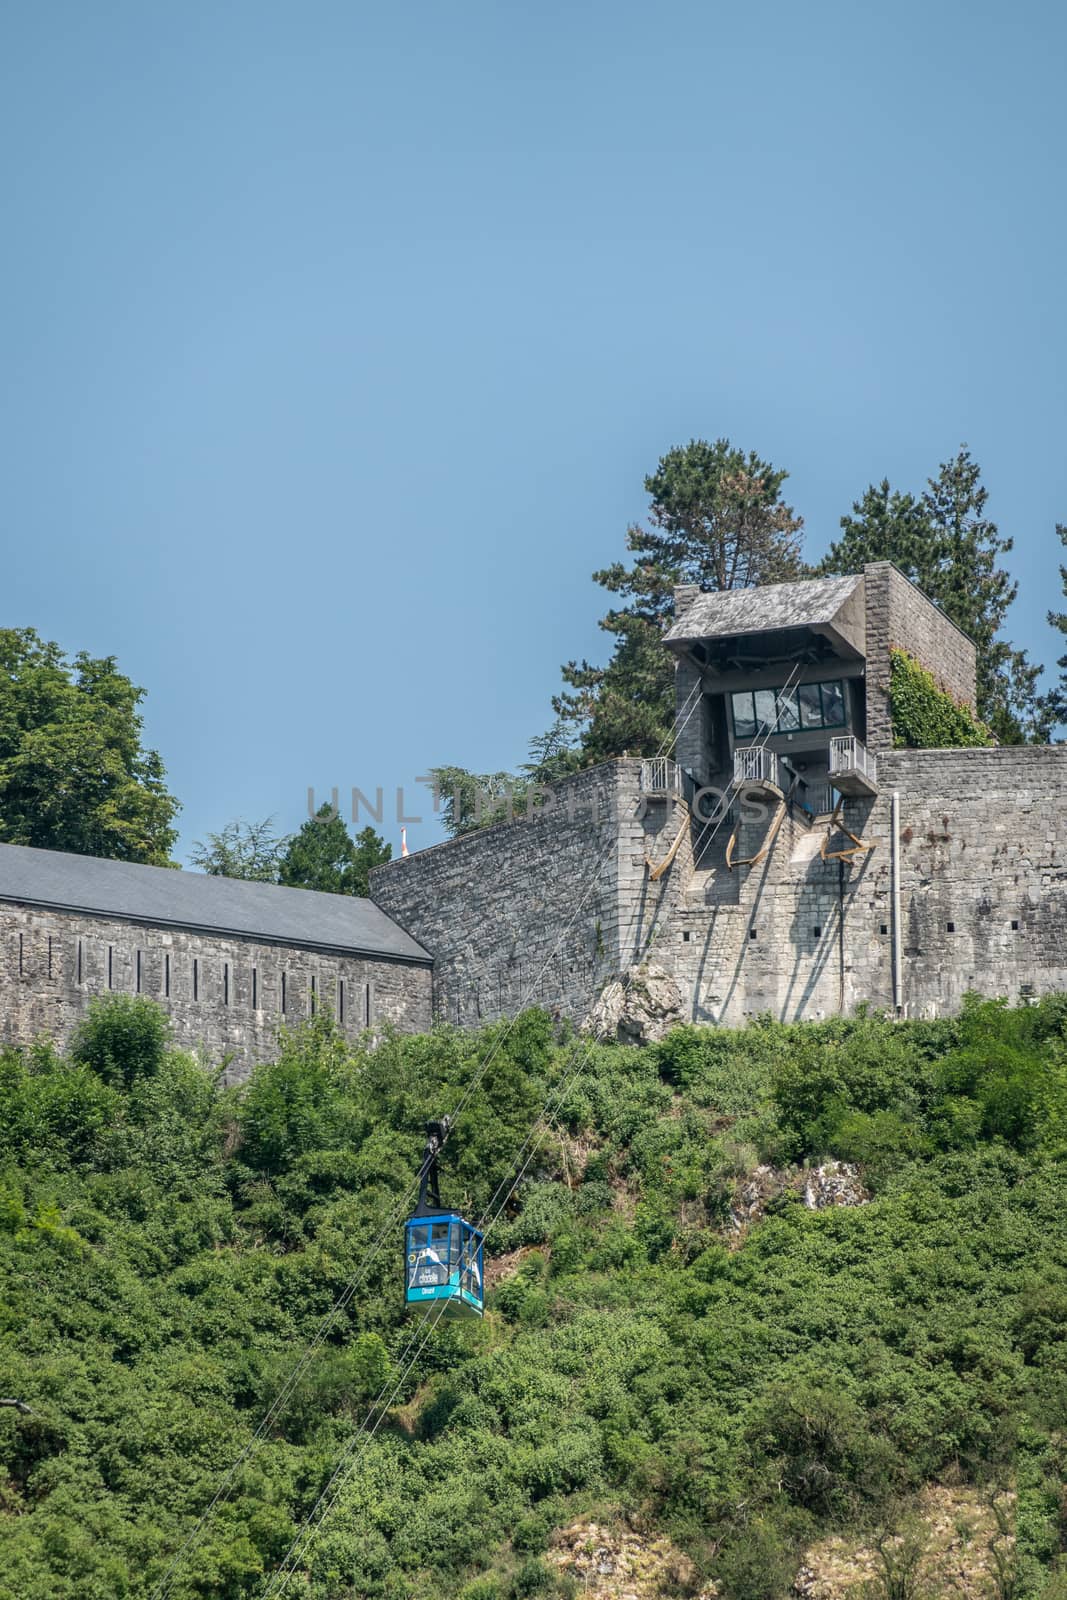 Dinant, Belgium - June 26, 2019: Blue cable car against green foliage bringing visitors up along gray stone cliffs and ramparts of Citadelle under blue sky.